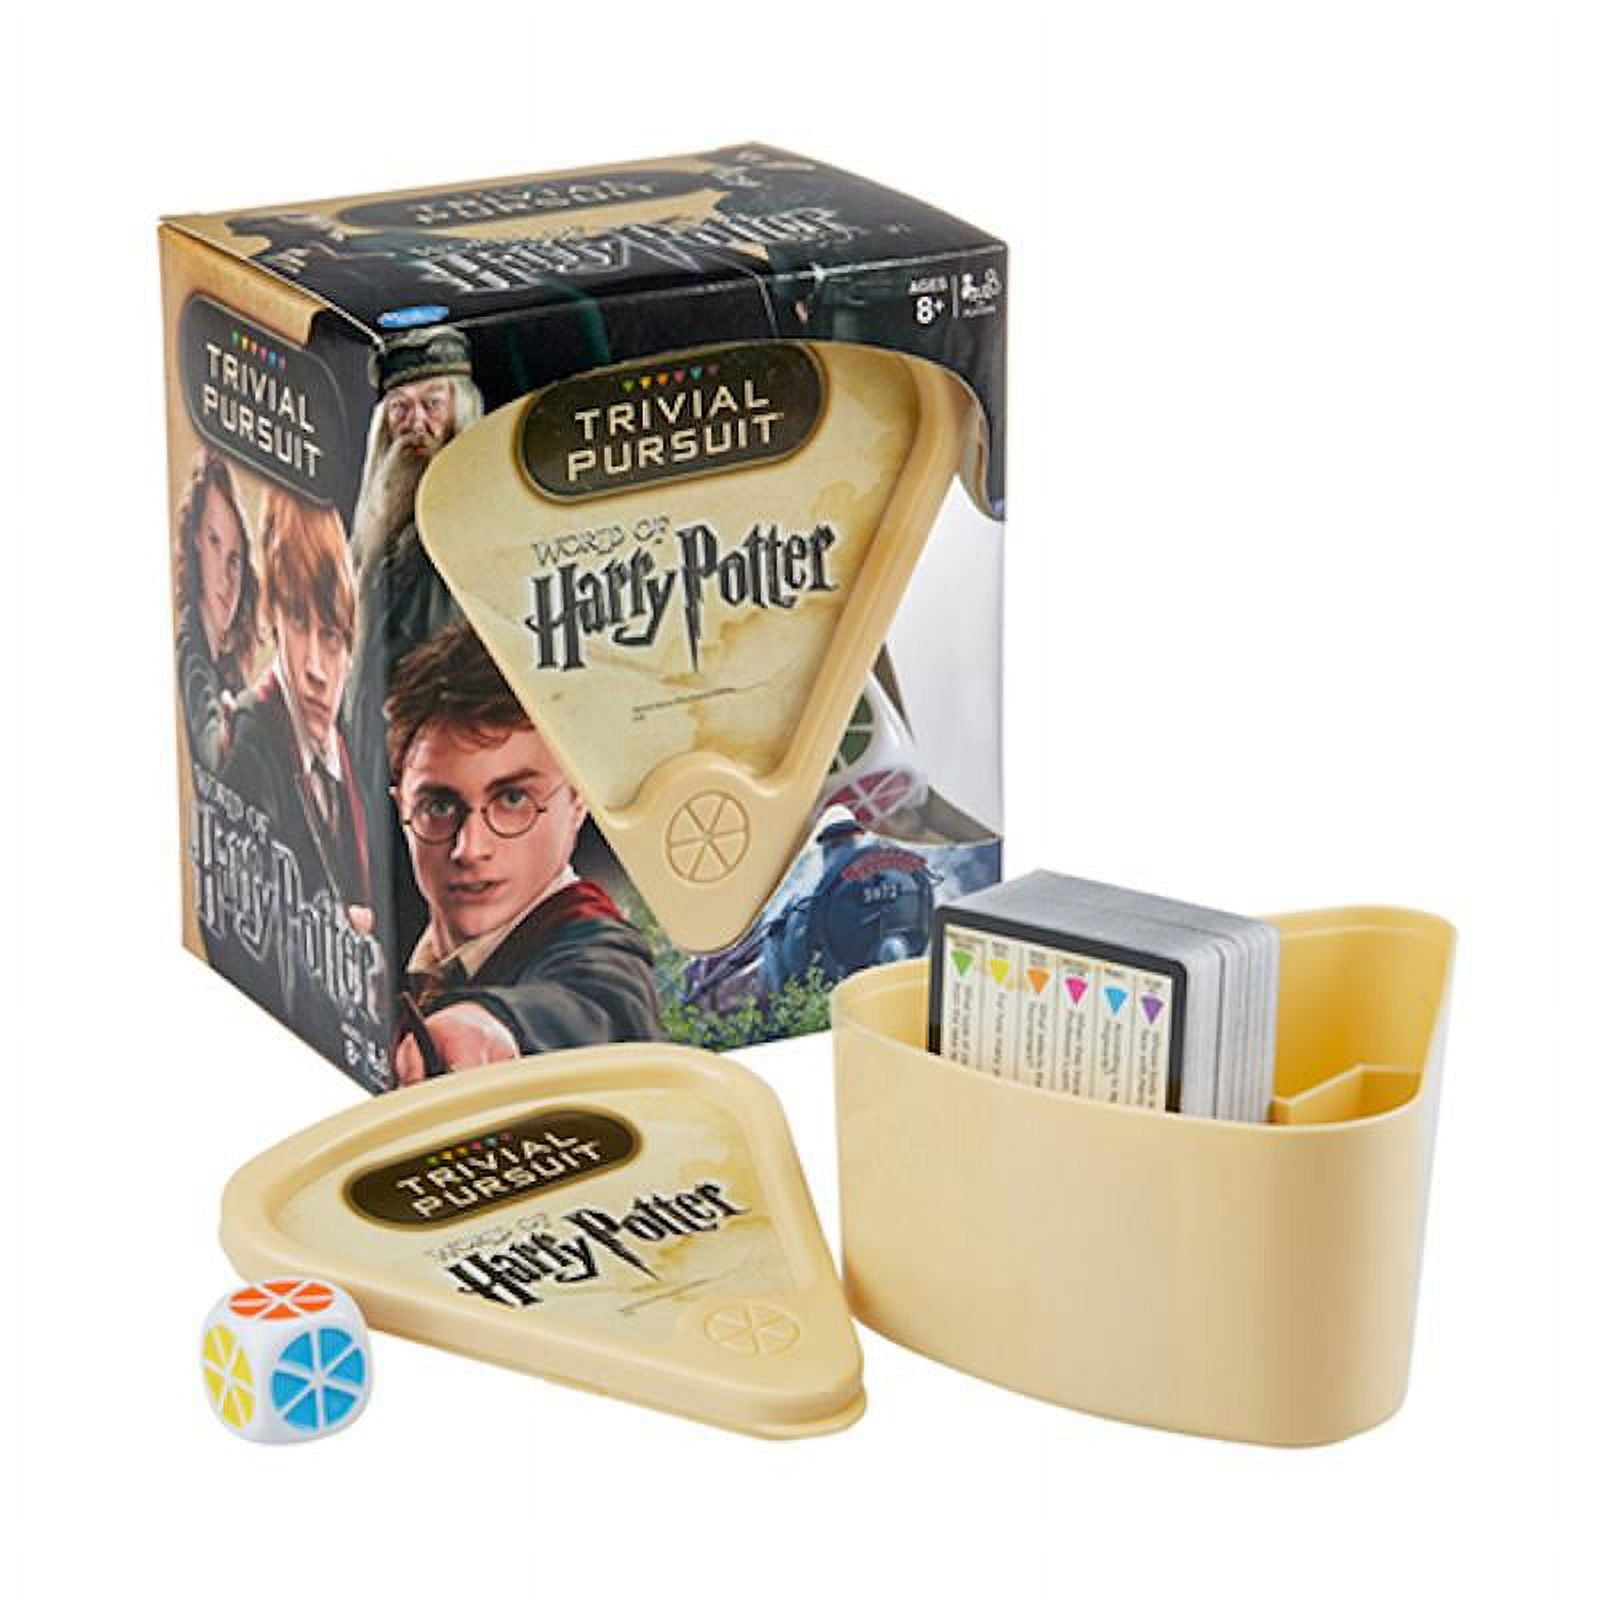 Harry Potter trivial pursuit is here!, It's time to test your Harry Potter  knowledge!!, By The Hook